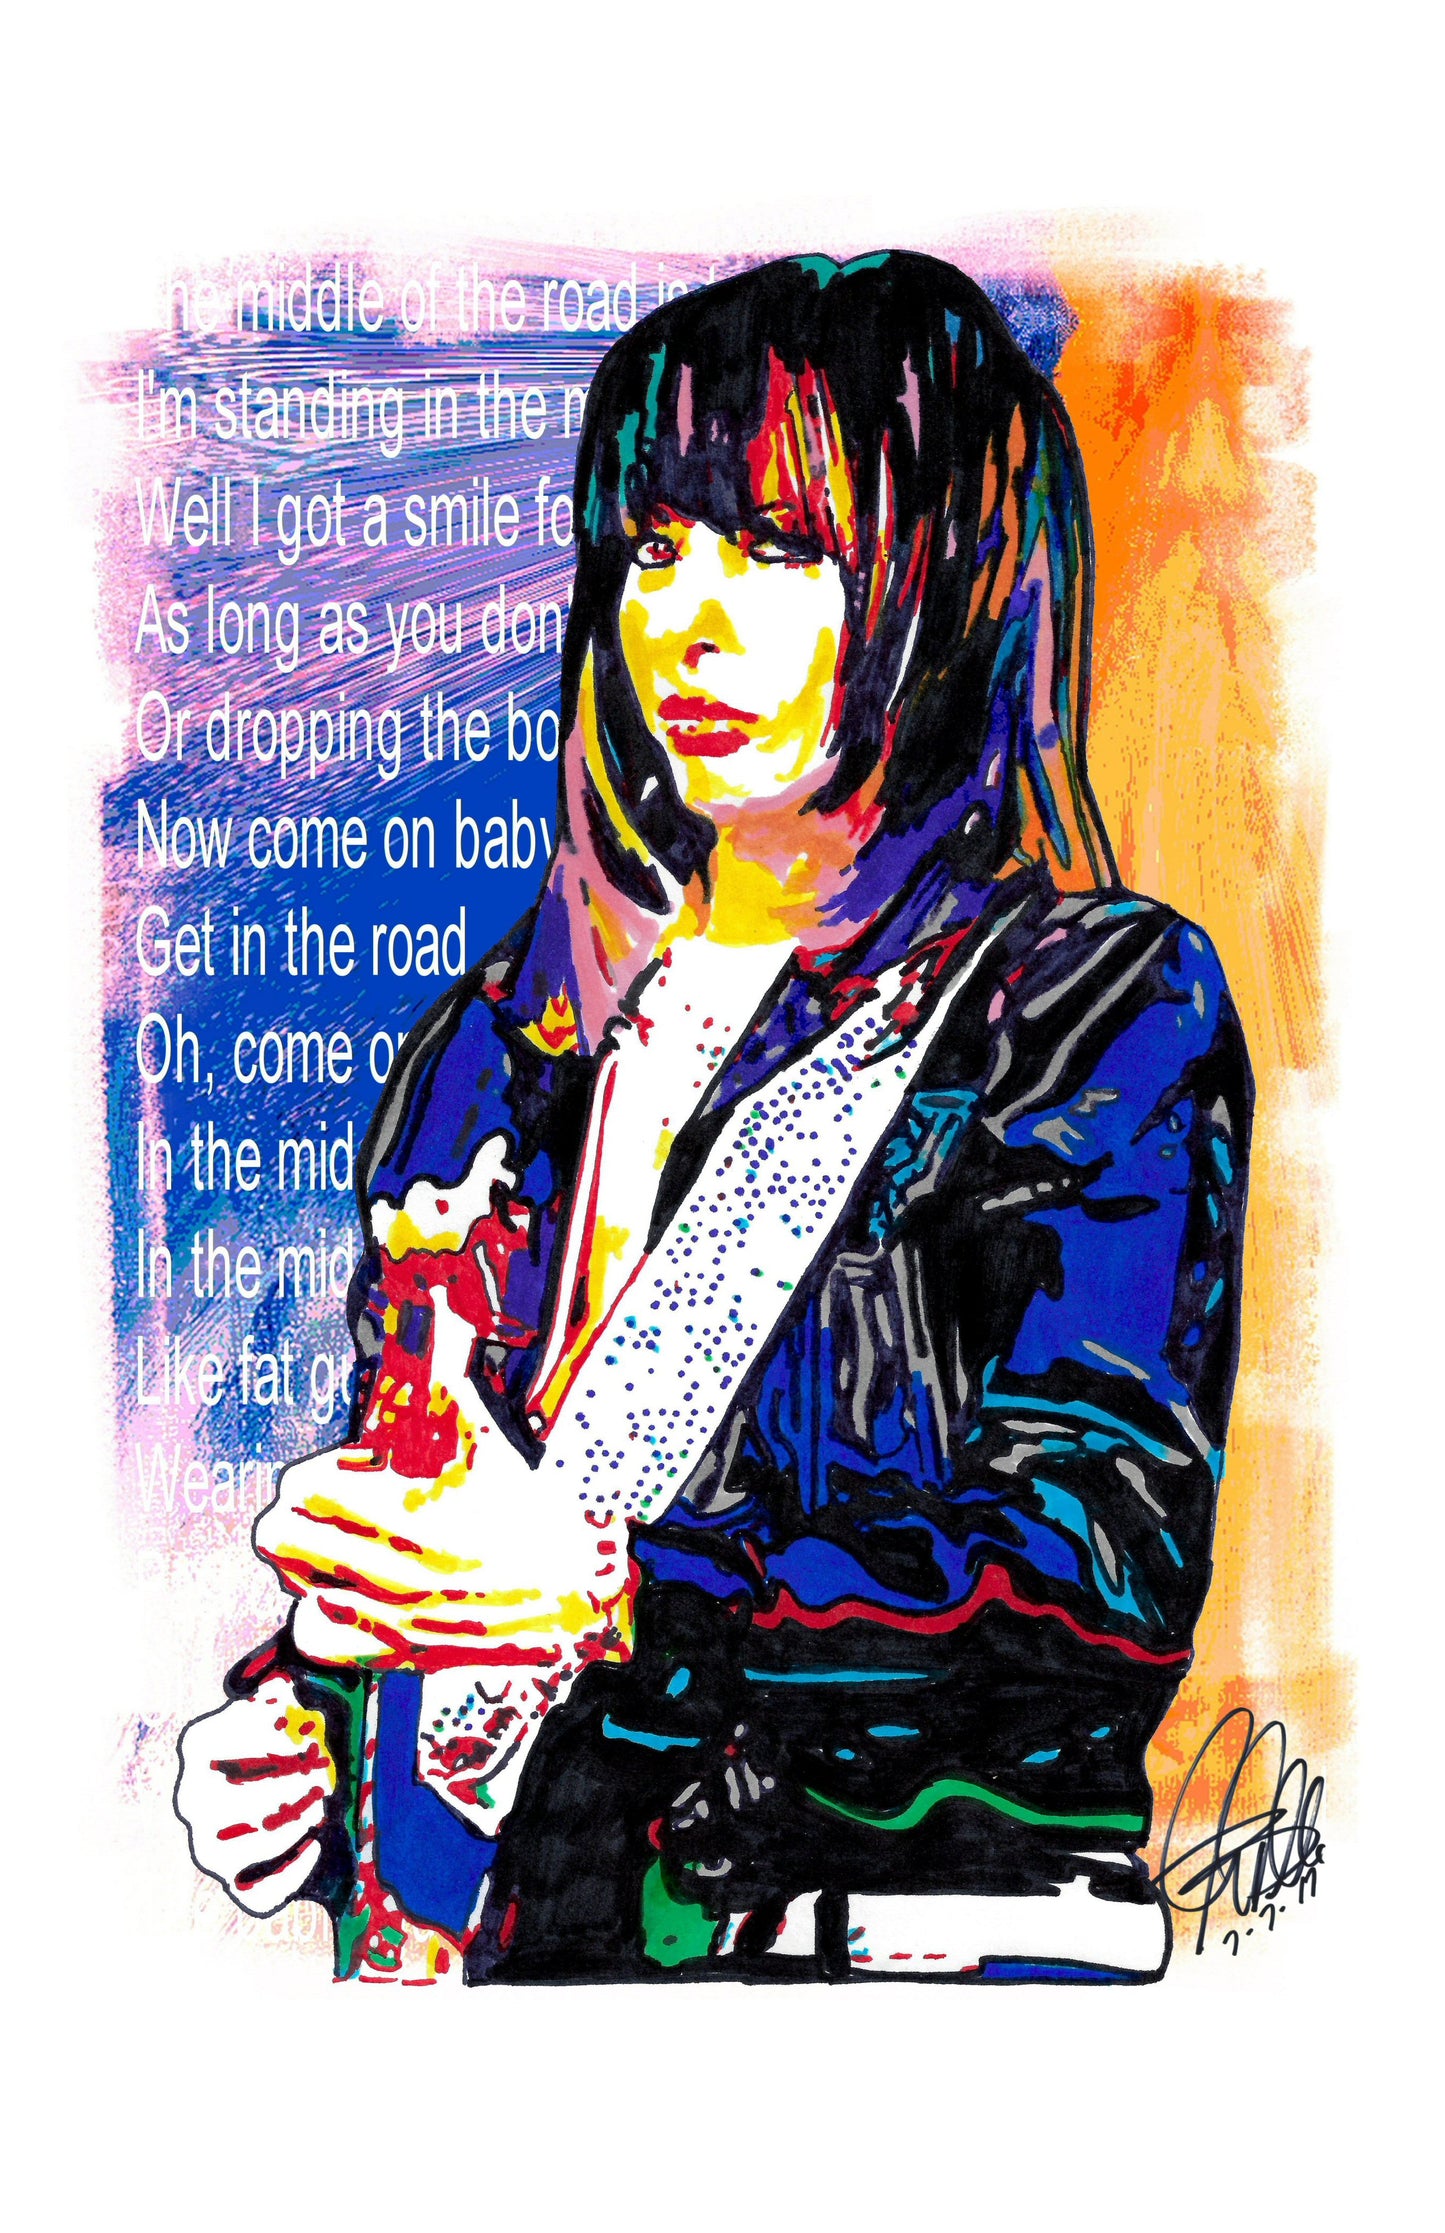 Chrissie Hynde The Pretenders New Wave Rock Music Poster Print Wall Art 11x17